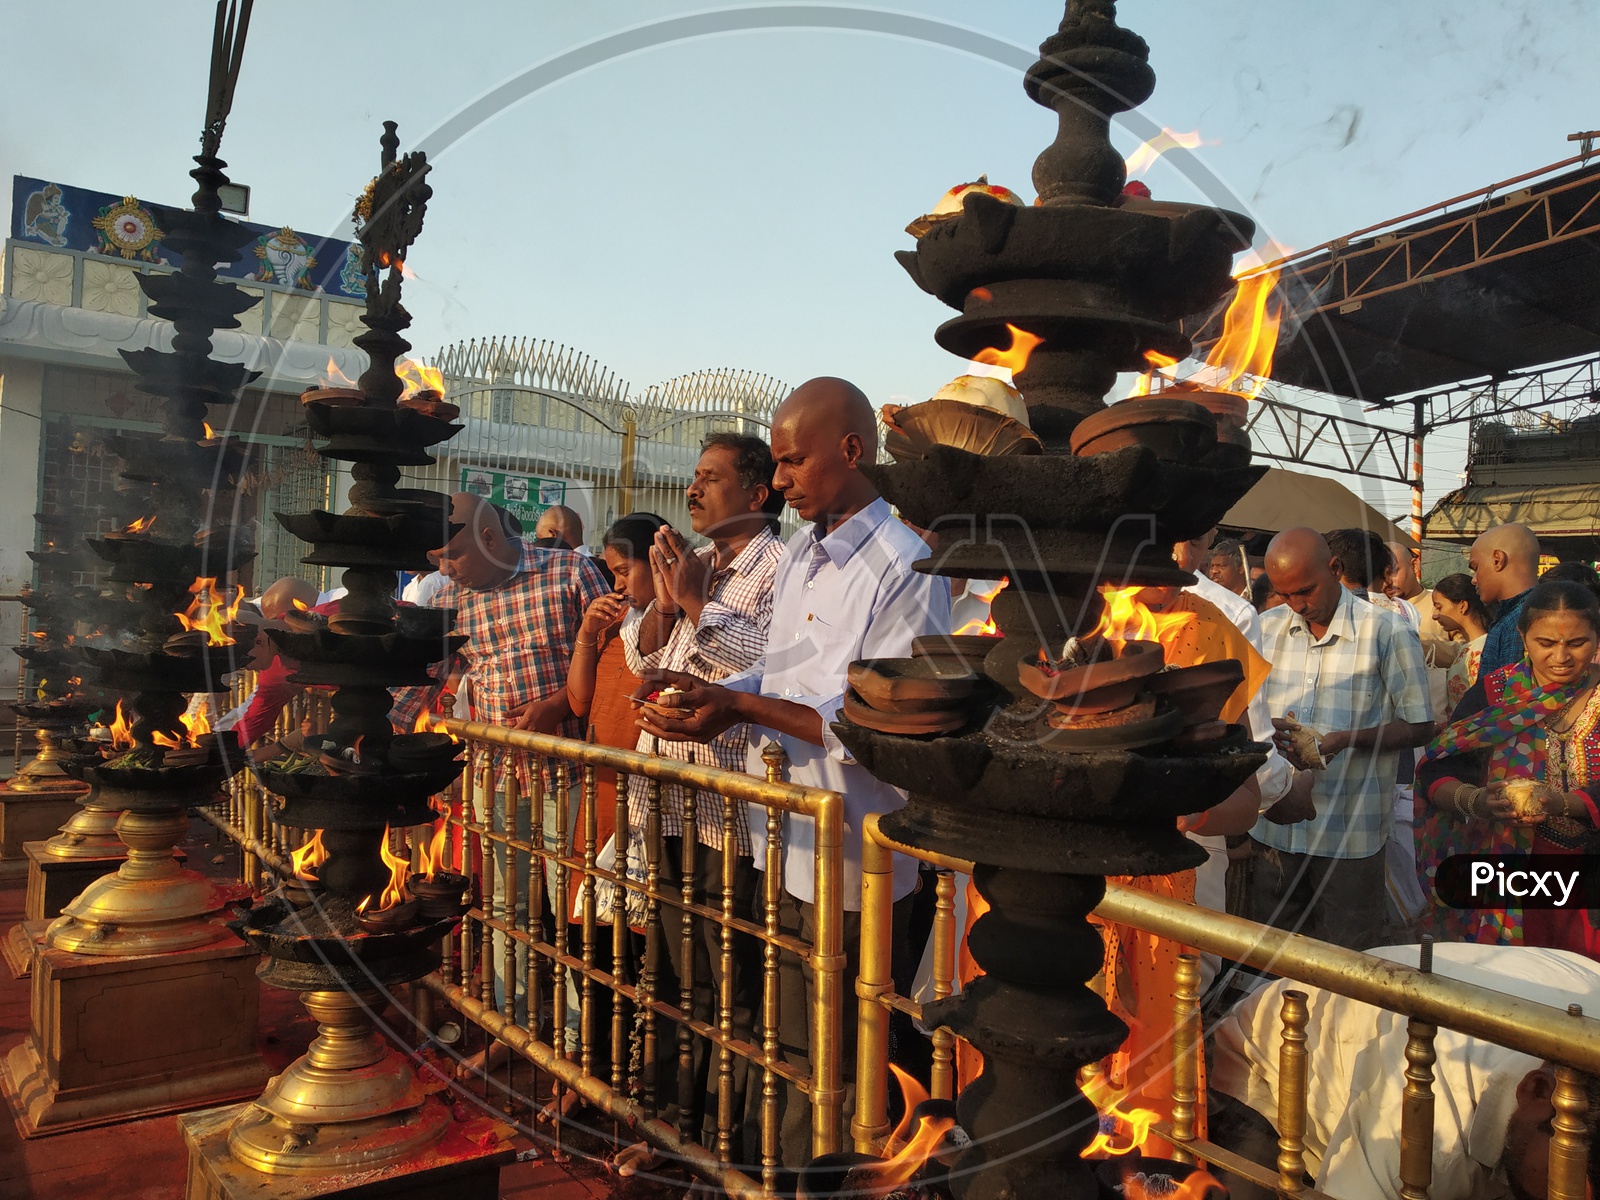 Pilgrims offering prayers by the oil lamps